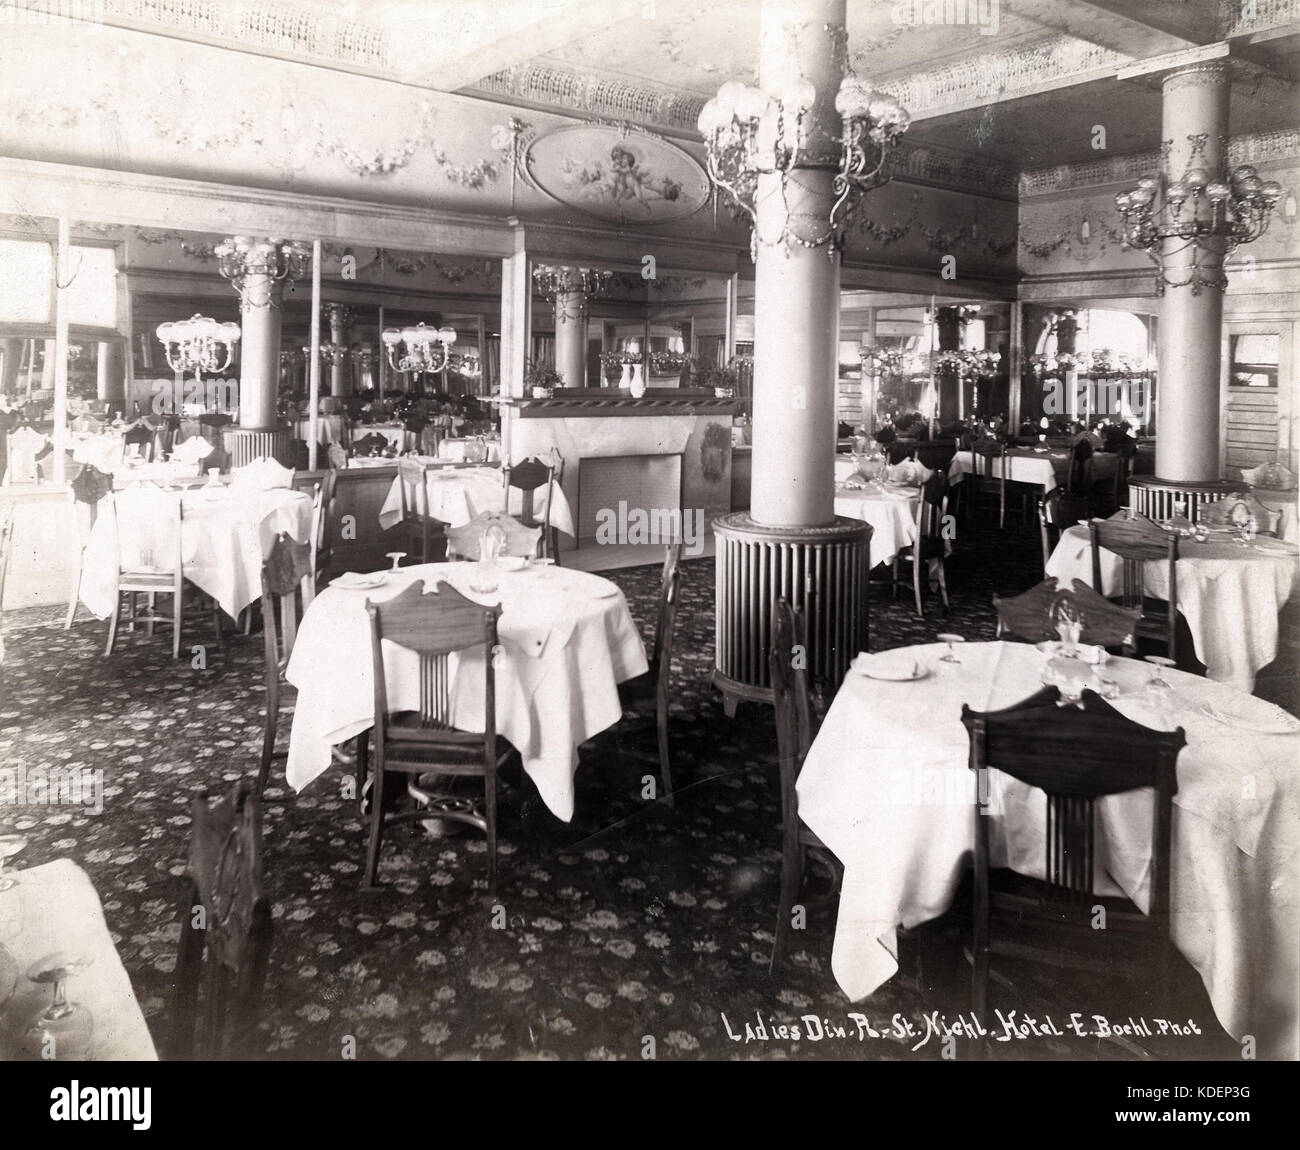 Ladies Dining Room in the St. Nicholas Hotel. 407 North Eighth Street. (Also called the Victoria Building. Designed by Louis Sullivan) Stock Photo